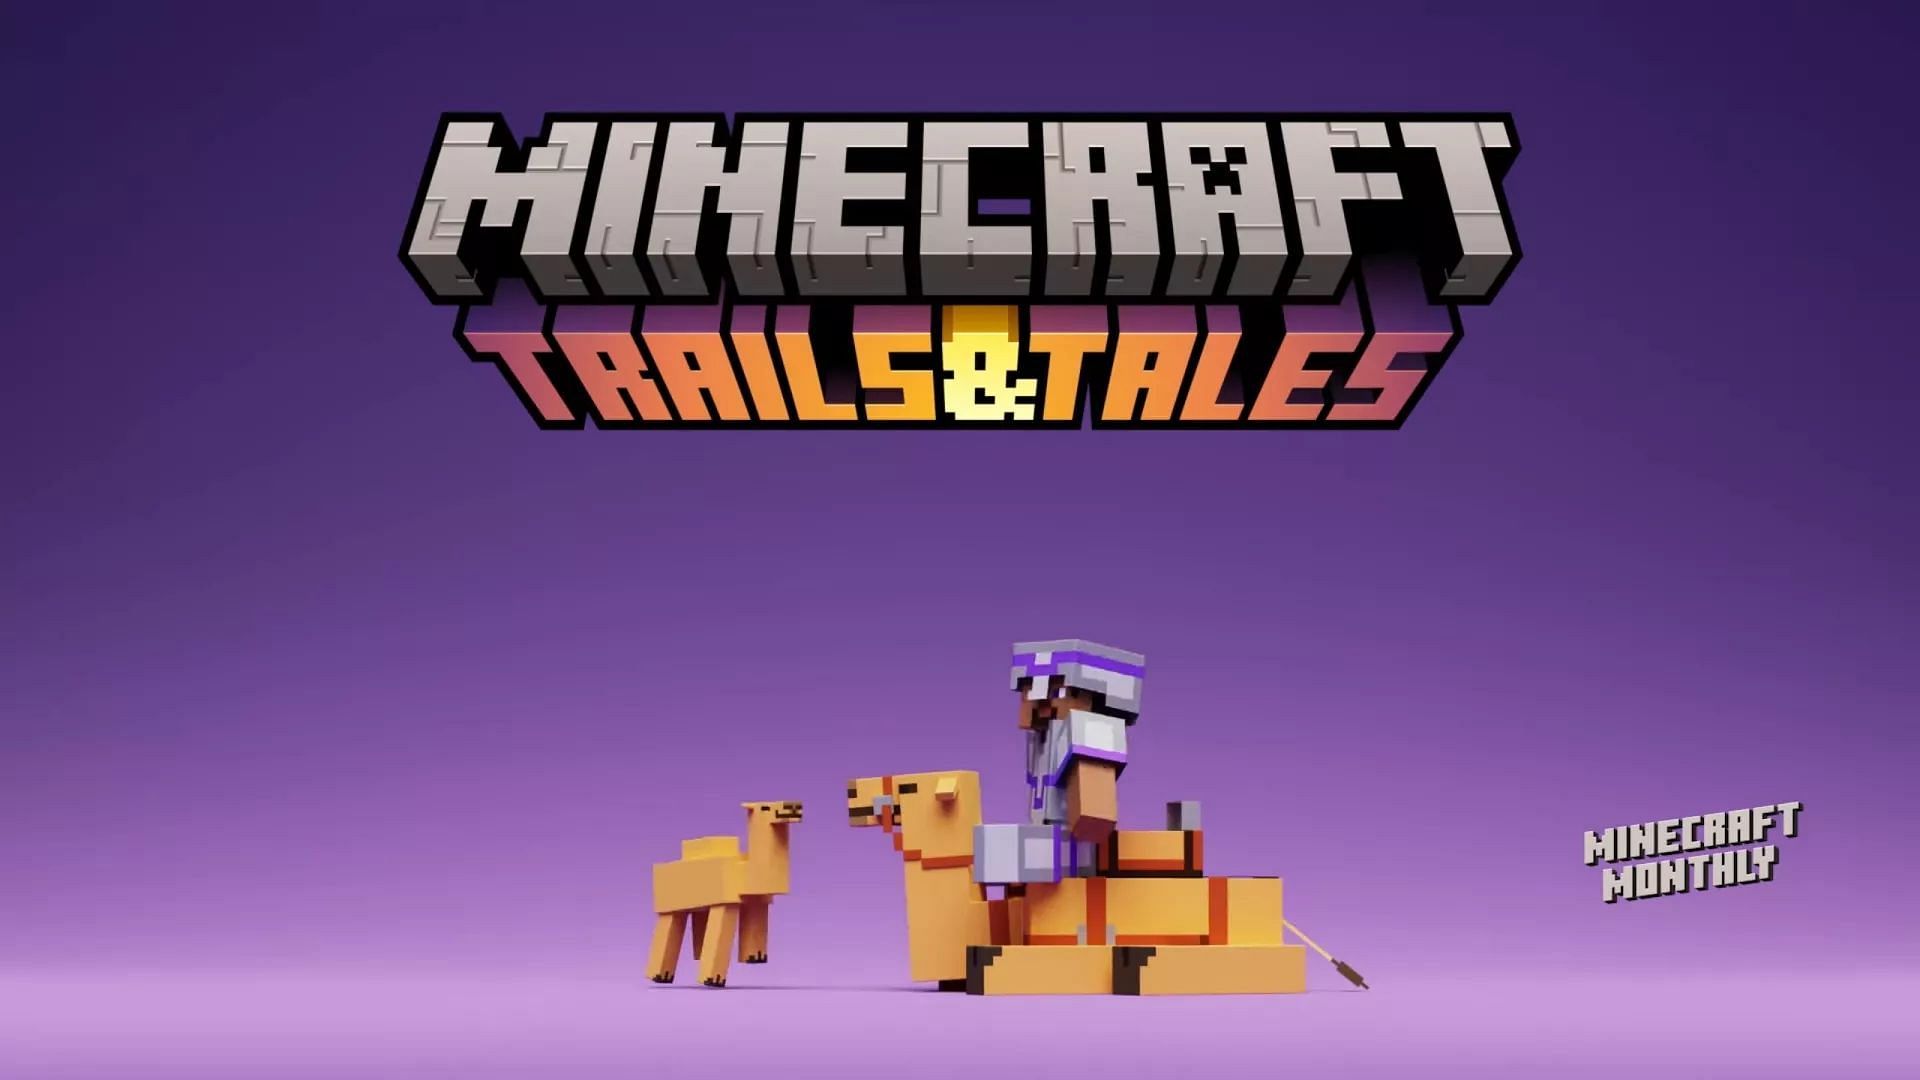 Mojang Announces Minecraft Update 1.20 as 'The Trails & Tales